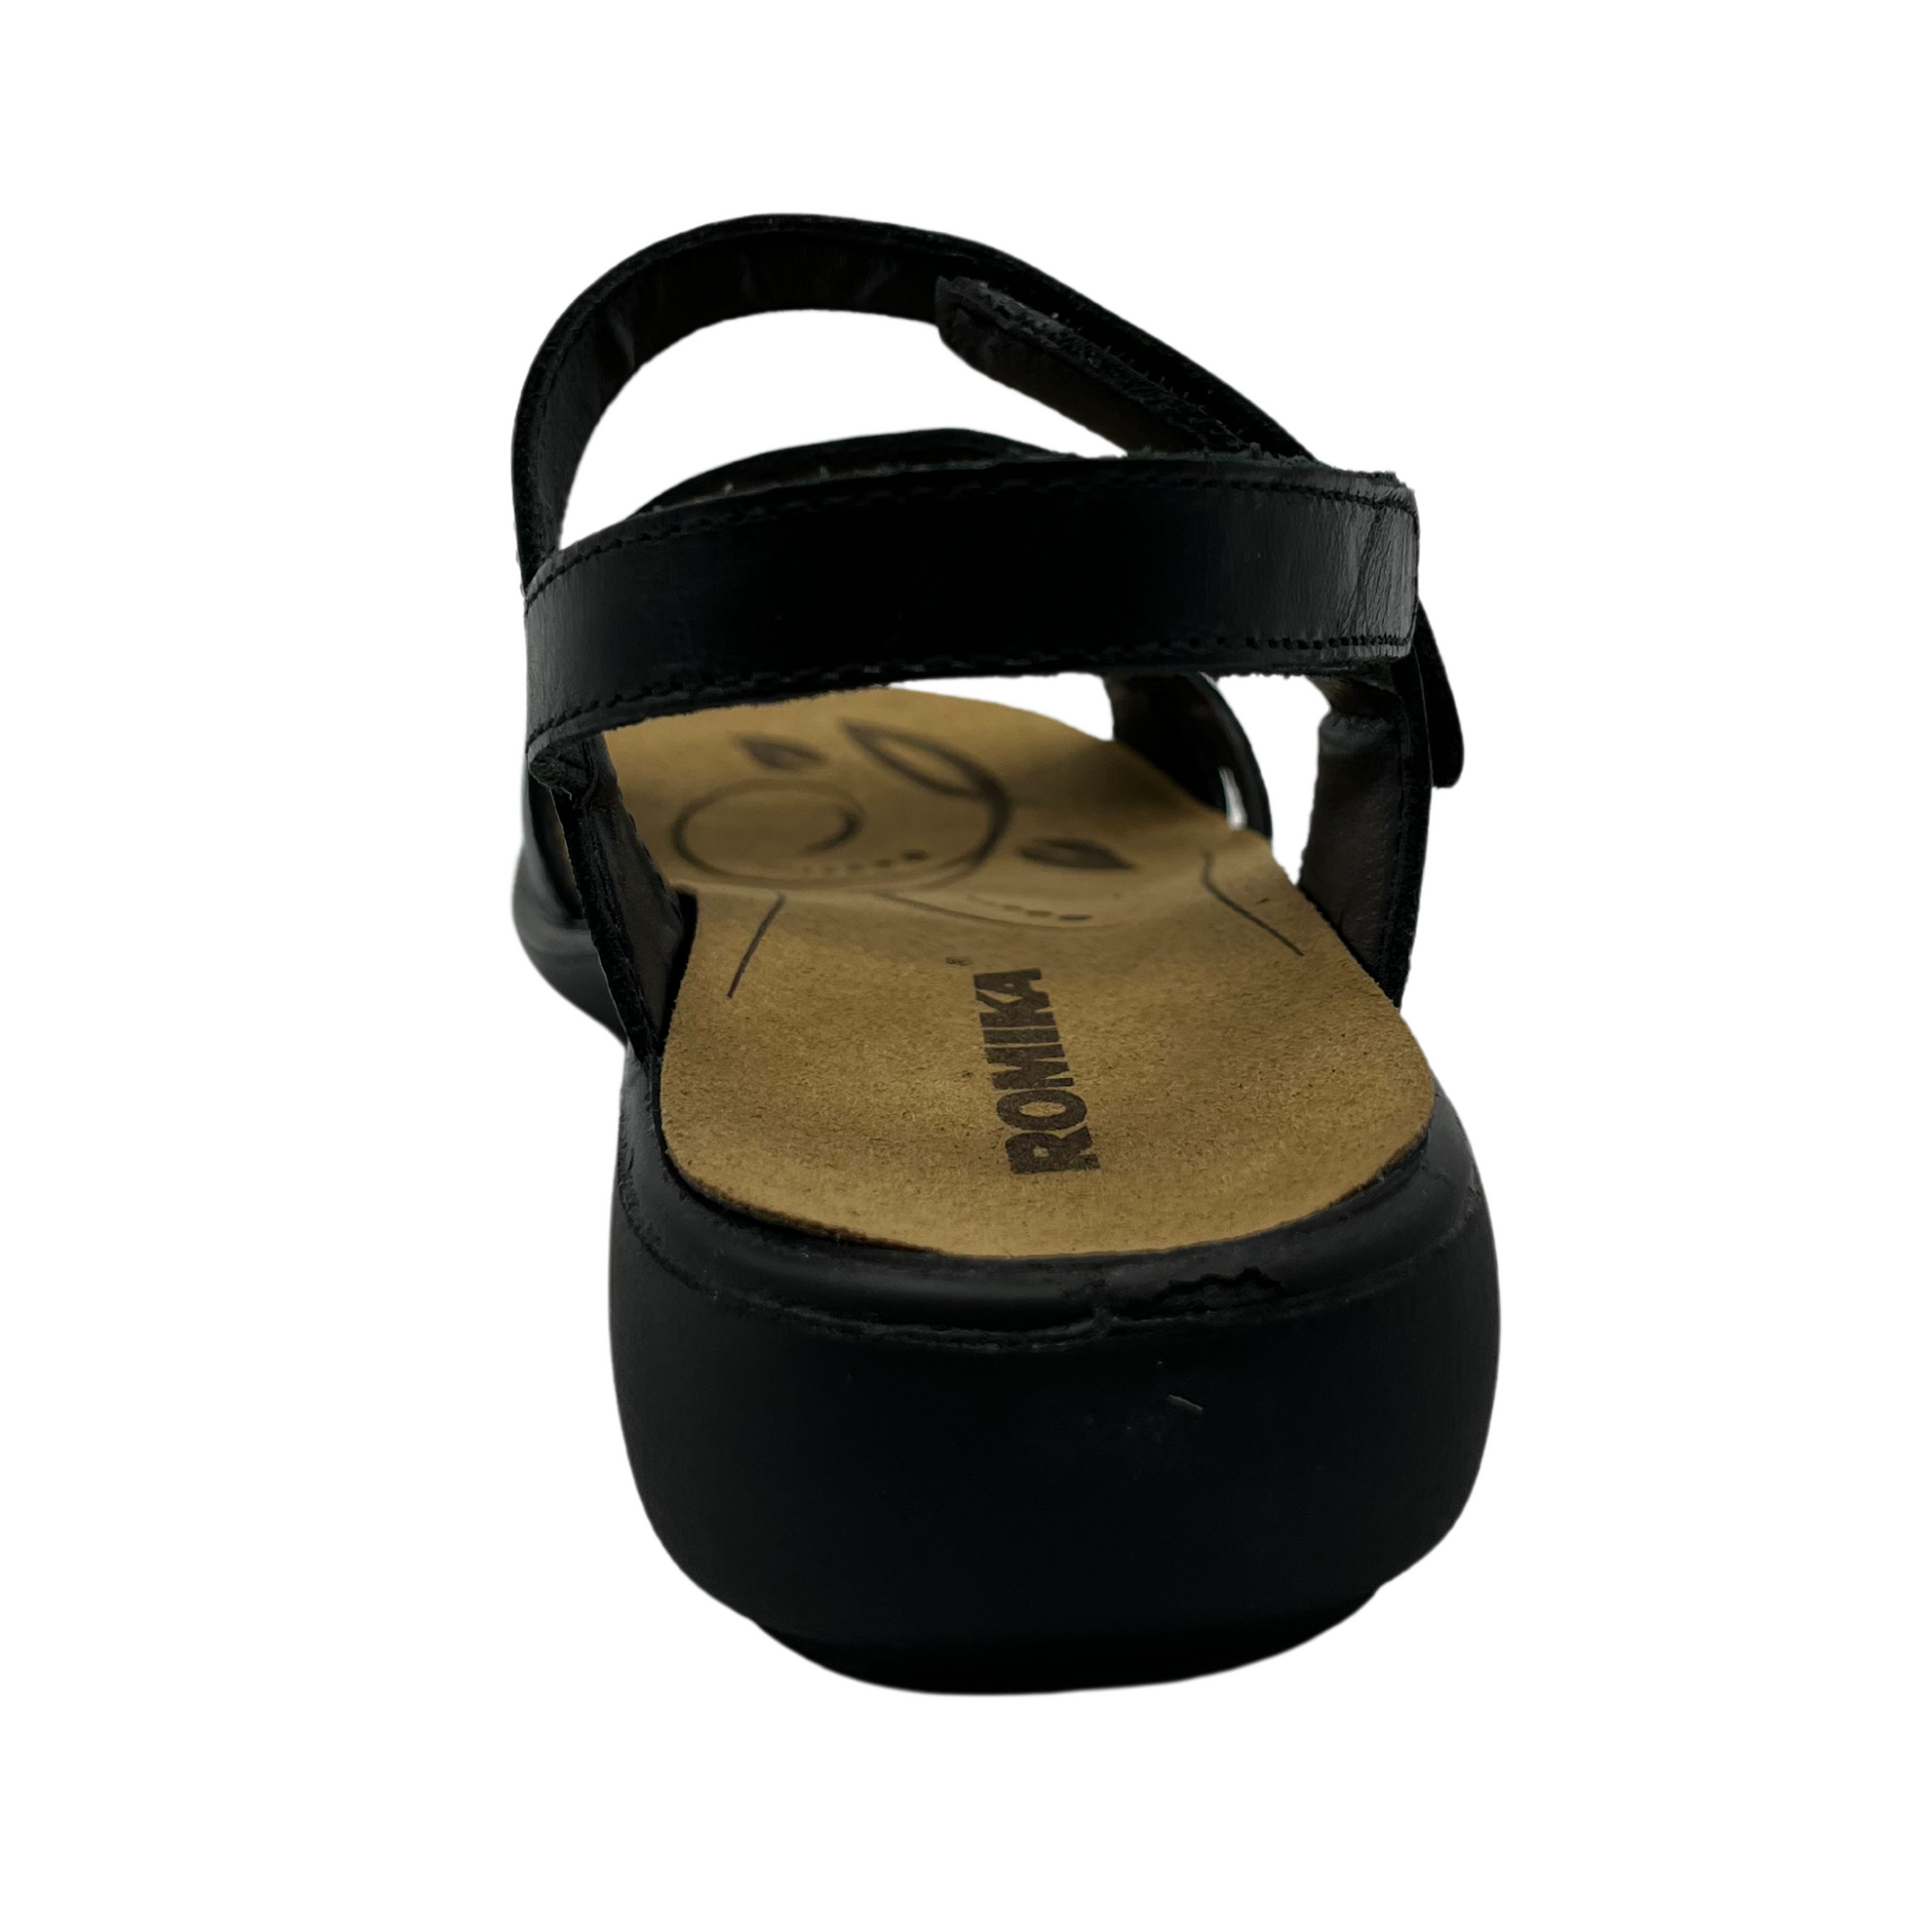 Back view of black leather sandal with brown lining and silver studs on straps